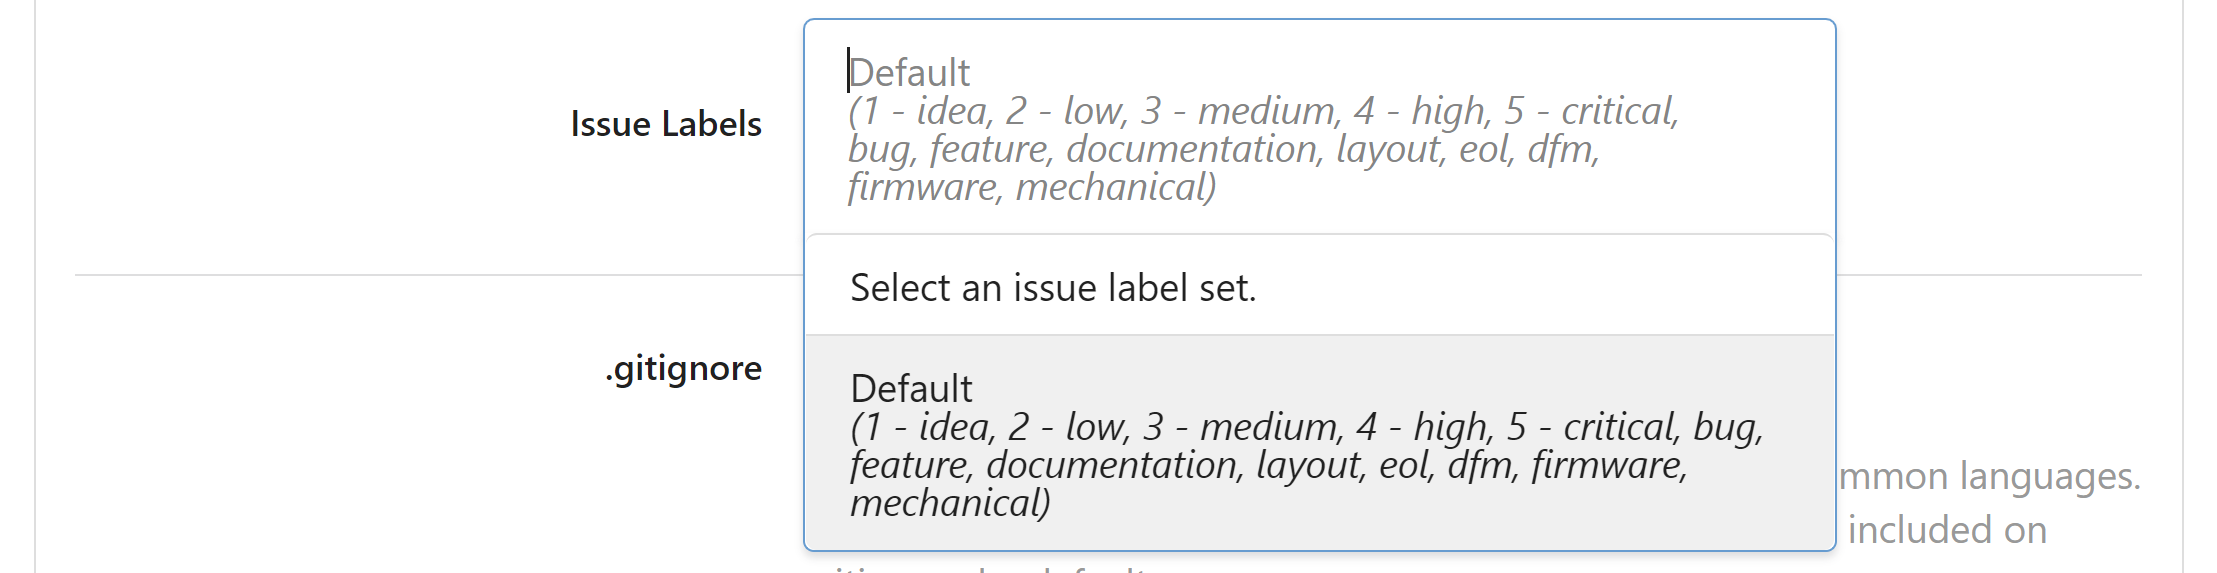 Initial set of issue labels with a default option.